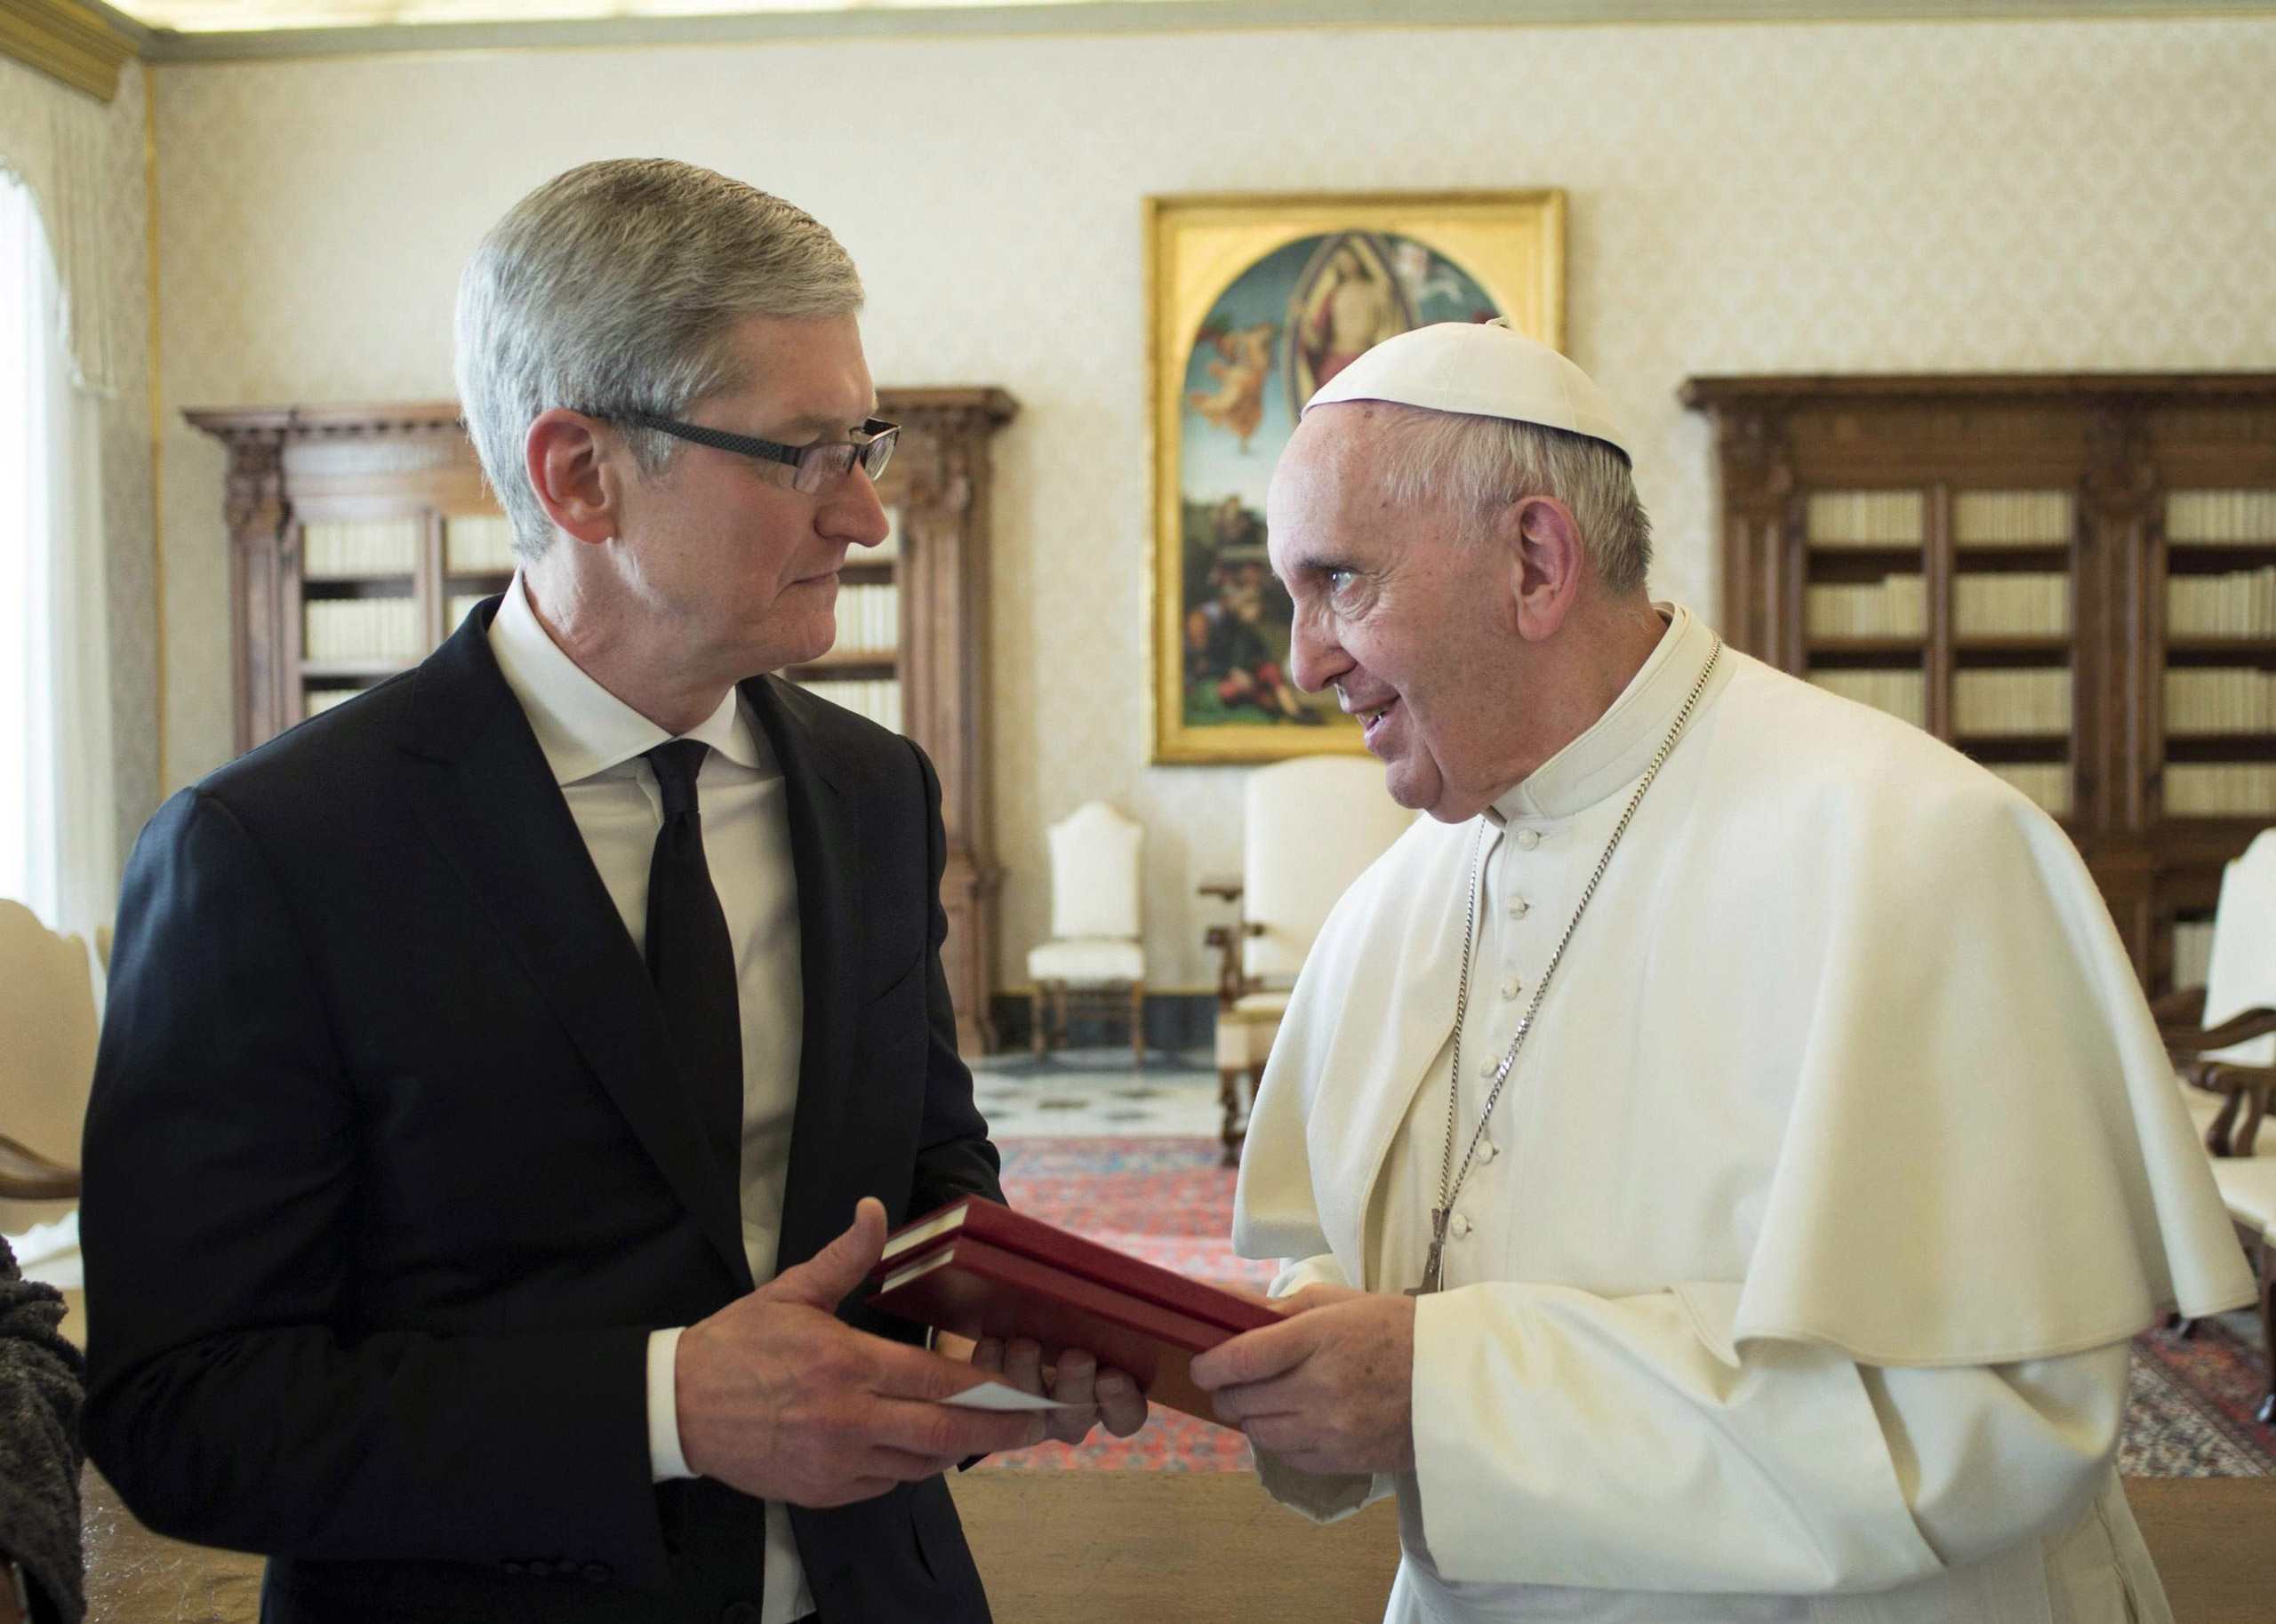 Pope Francis talks with Apple CEO Tim Cook during a private audience in the Vatican, on Jan. 22, 2016. (Osservatore Romano—EPA)